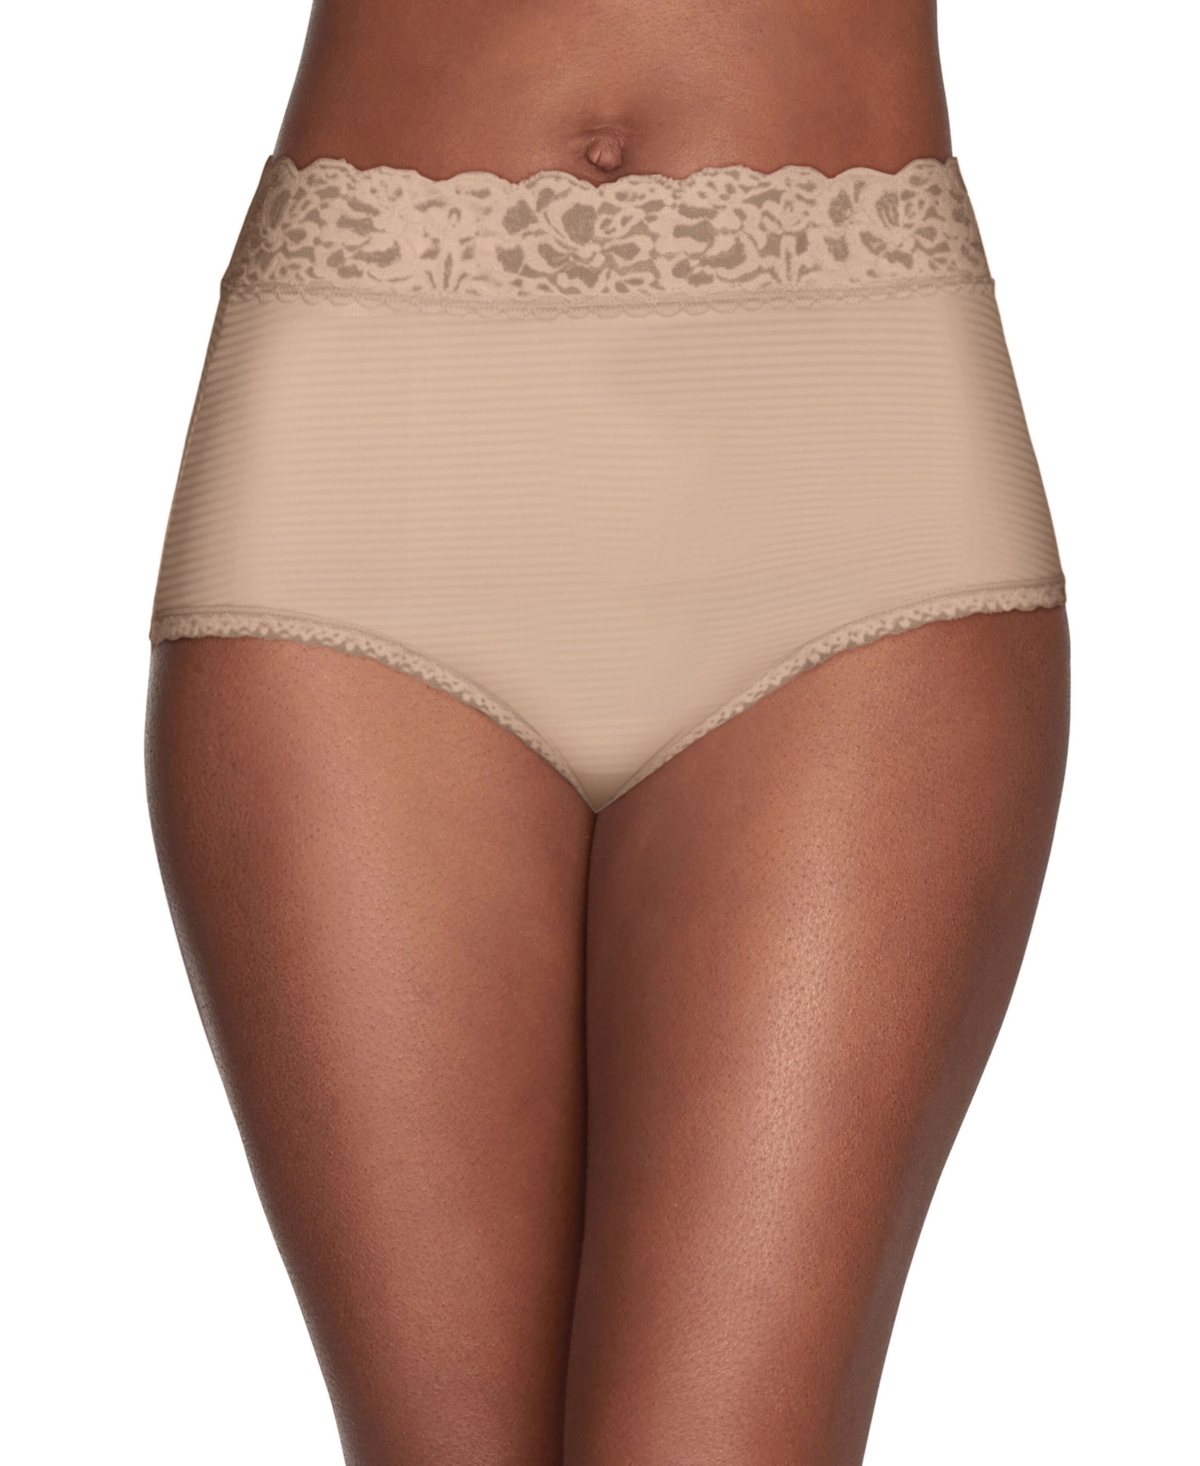 UPC 083626000074 product image for Vanity Fair Flattering Lace Stretch Brief Underwear 13281, also available in ext | upcitemdb.com